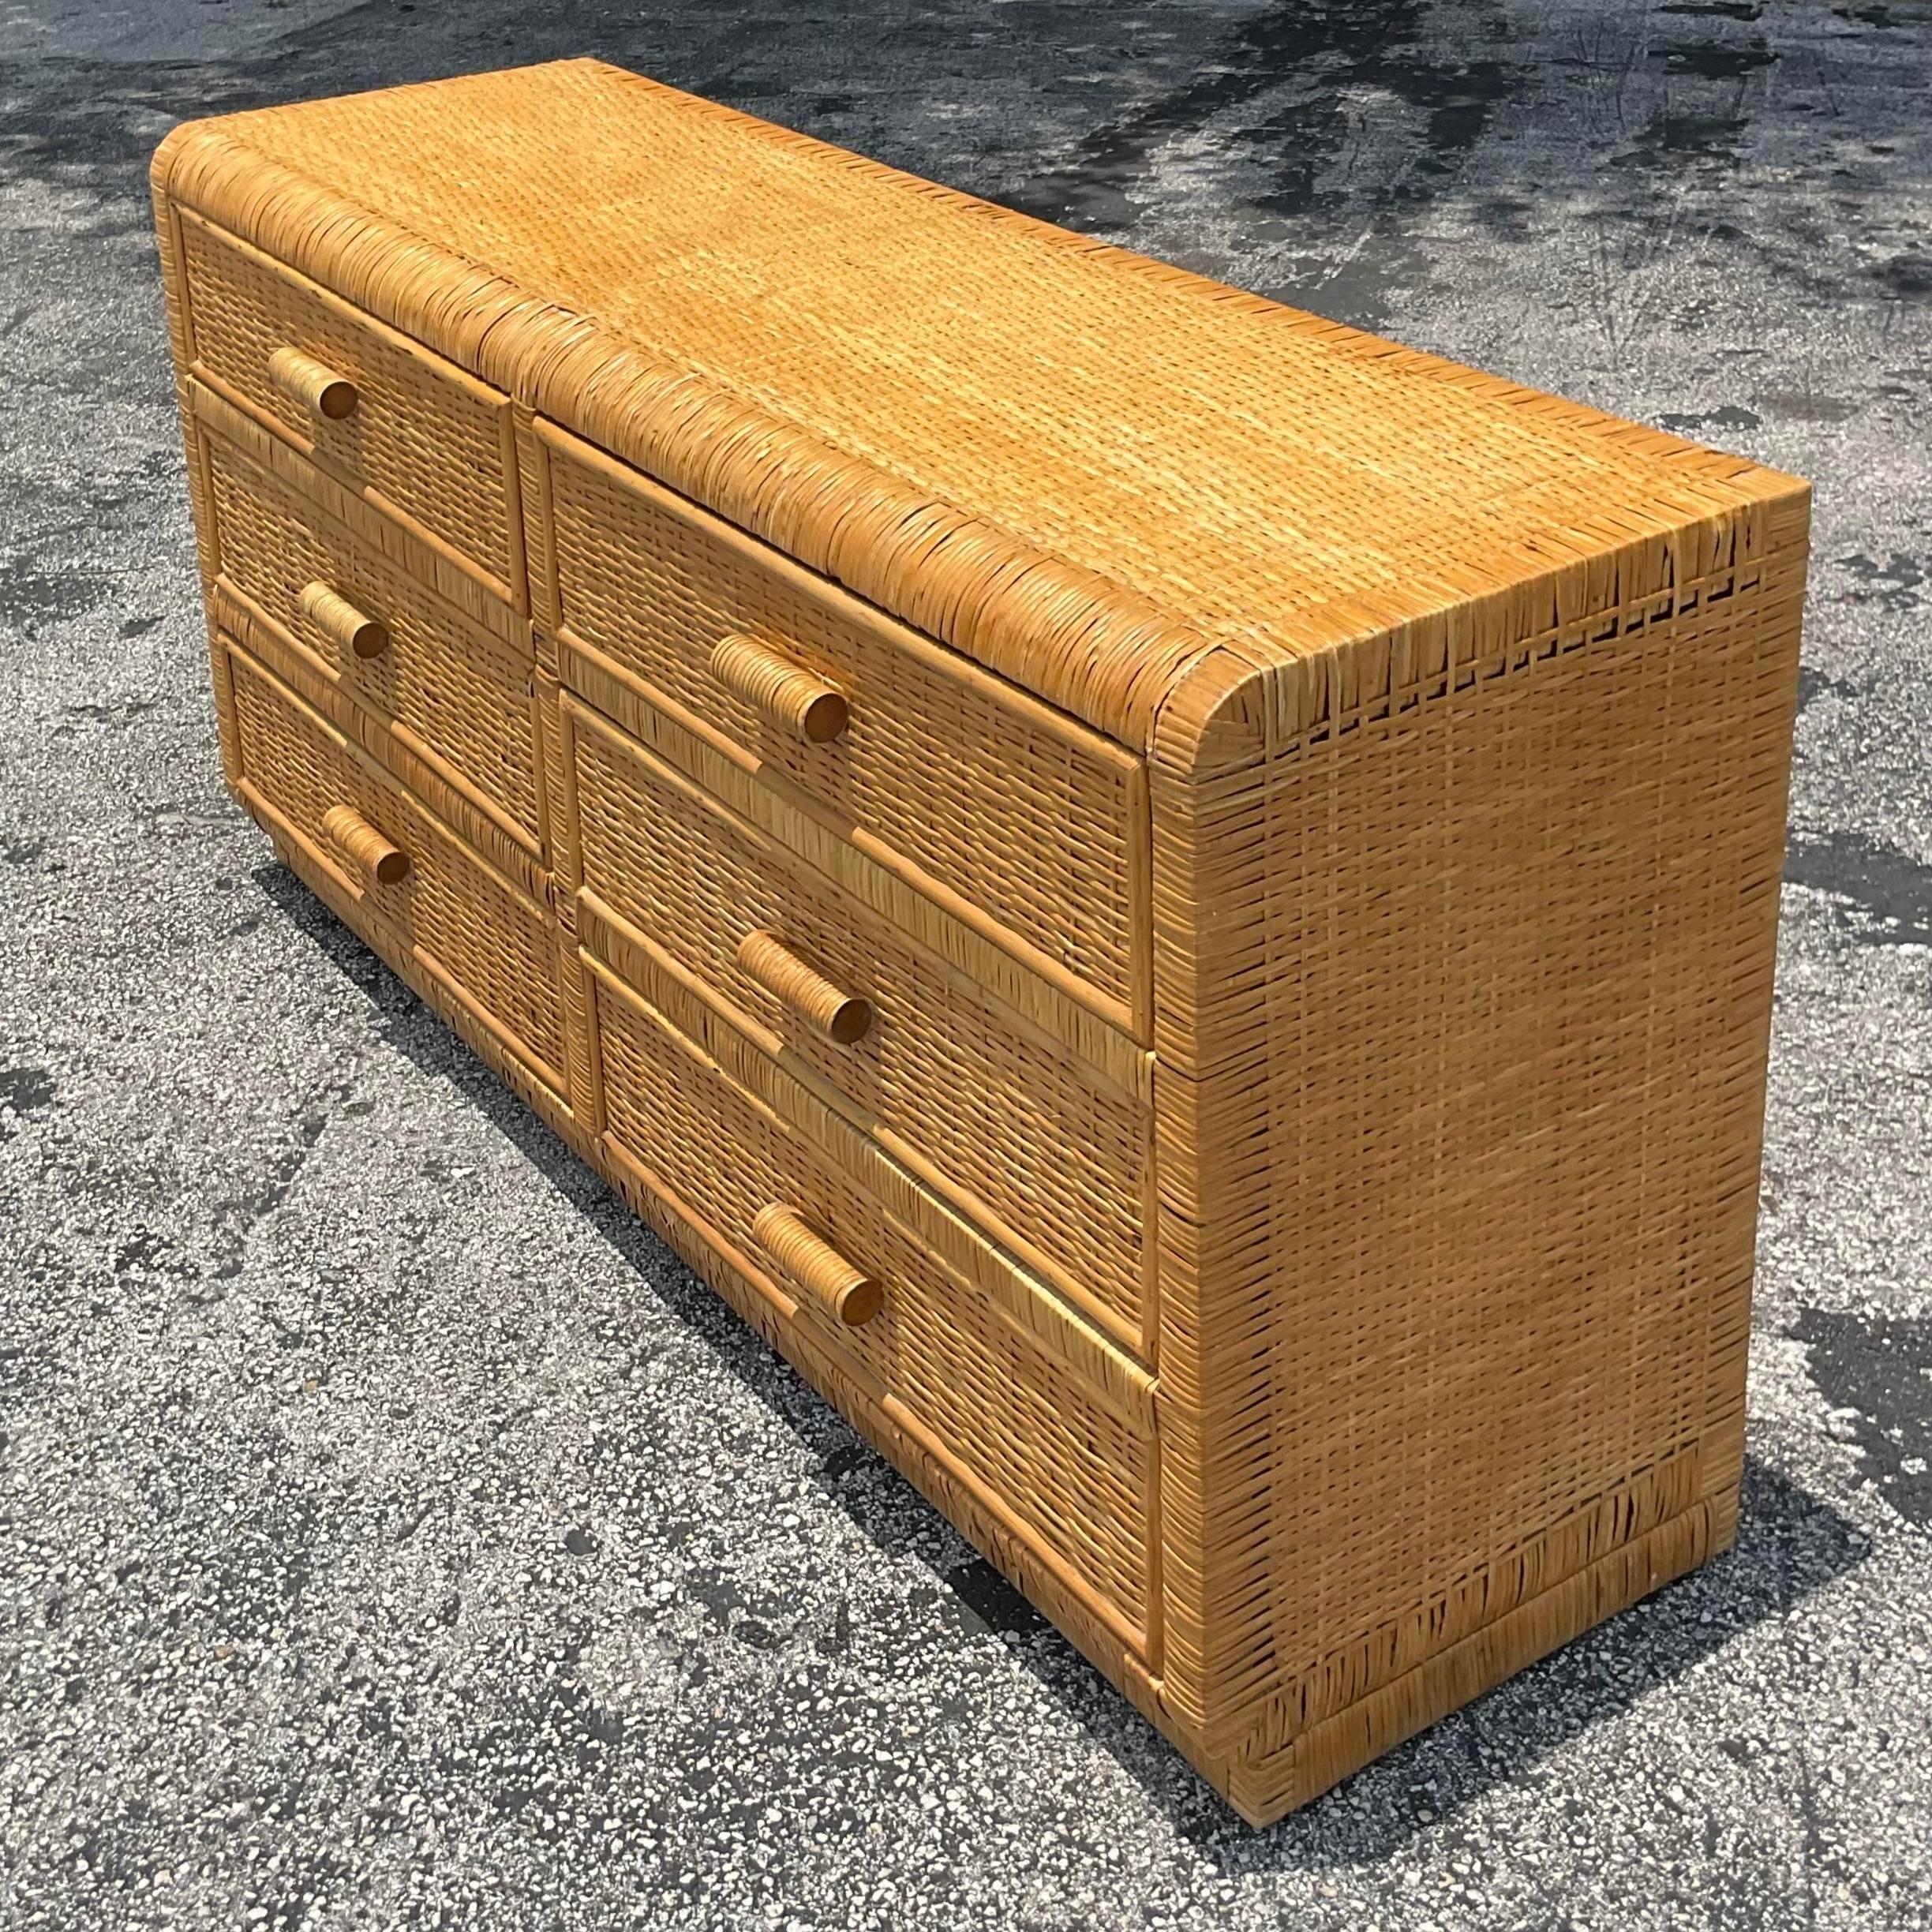 Enhance your home with the Vintage Coastal Woven Rattan Six Drawer Dresser. This American-style piece blends coastal charm with classic elegance, featuring six spacious drawers and intricate rattan detailing. Perfect for adding a touch of relaxed